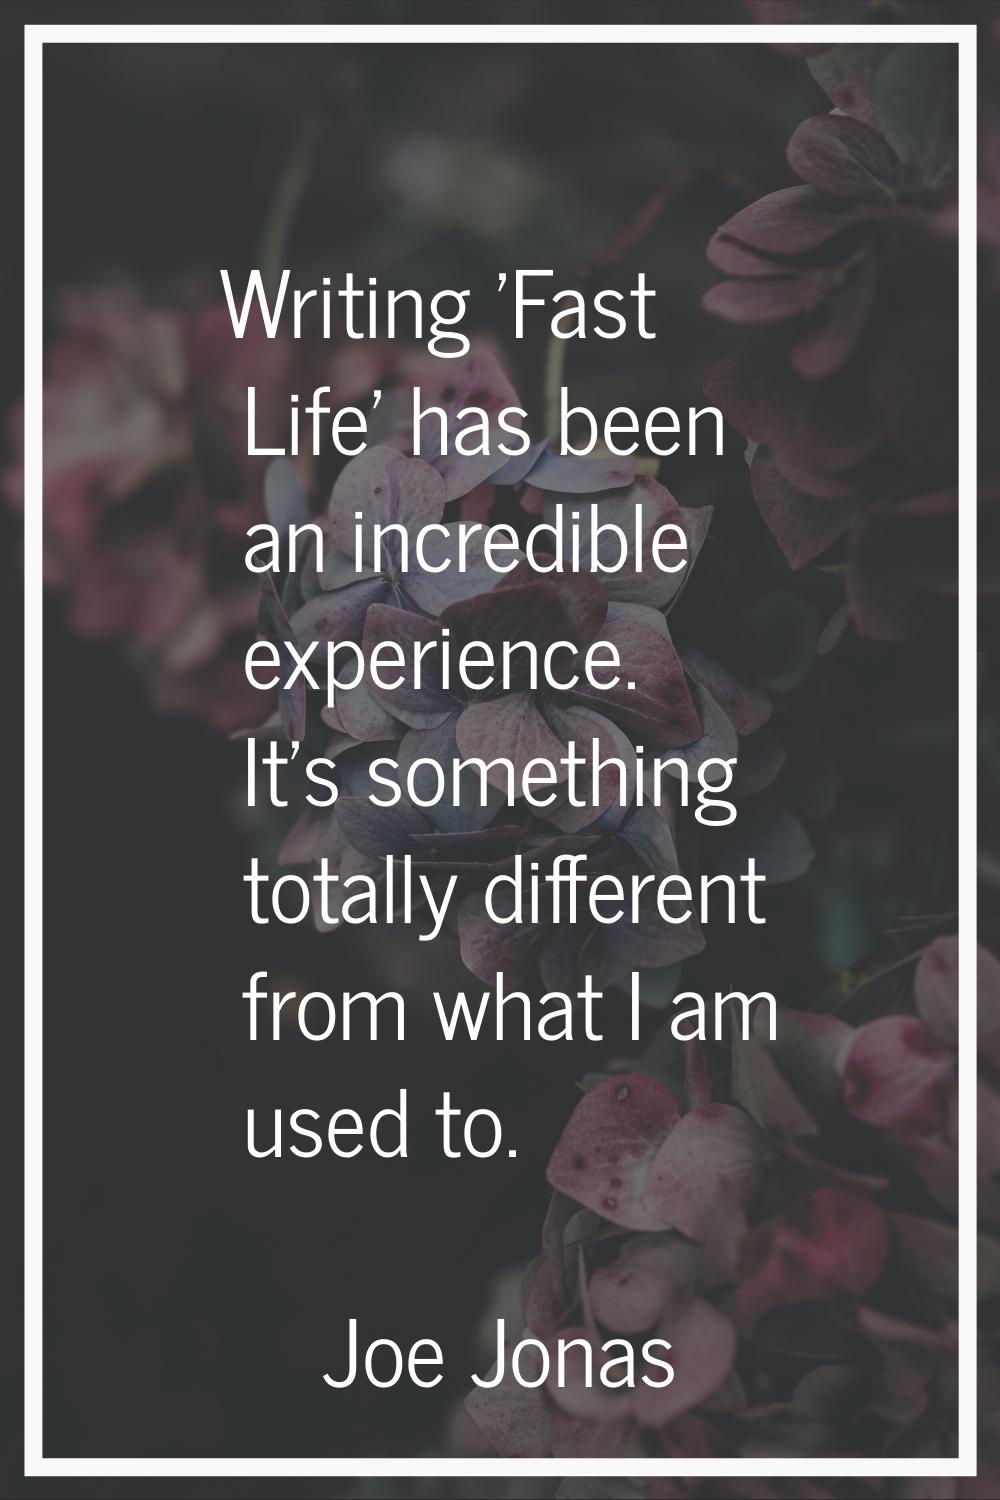 Writing 'Fast Life' has been an incredible experience. It's something totally different from what I